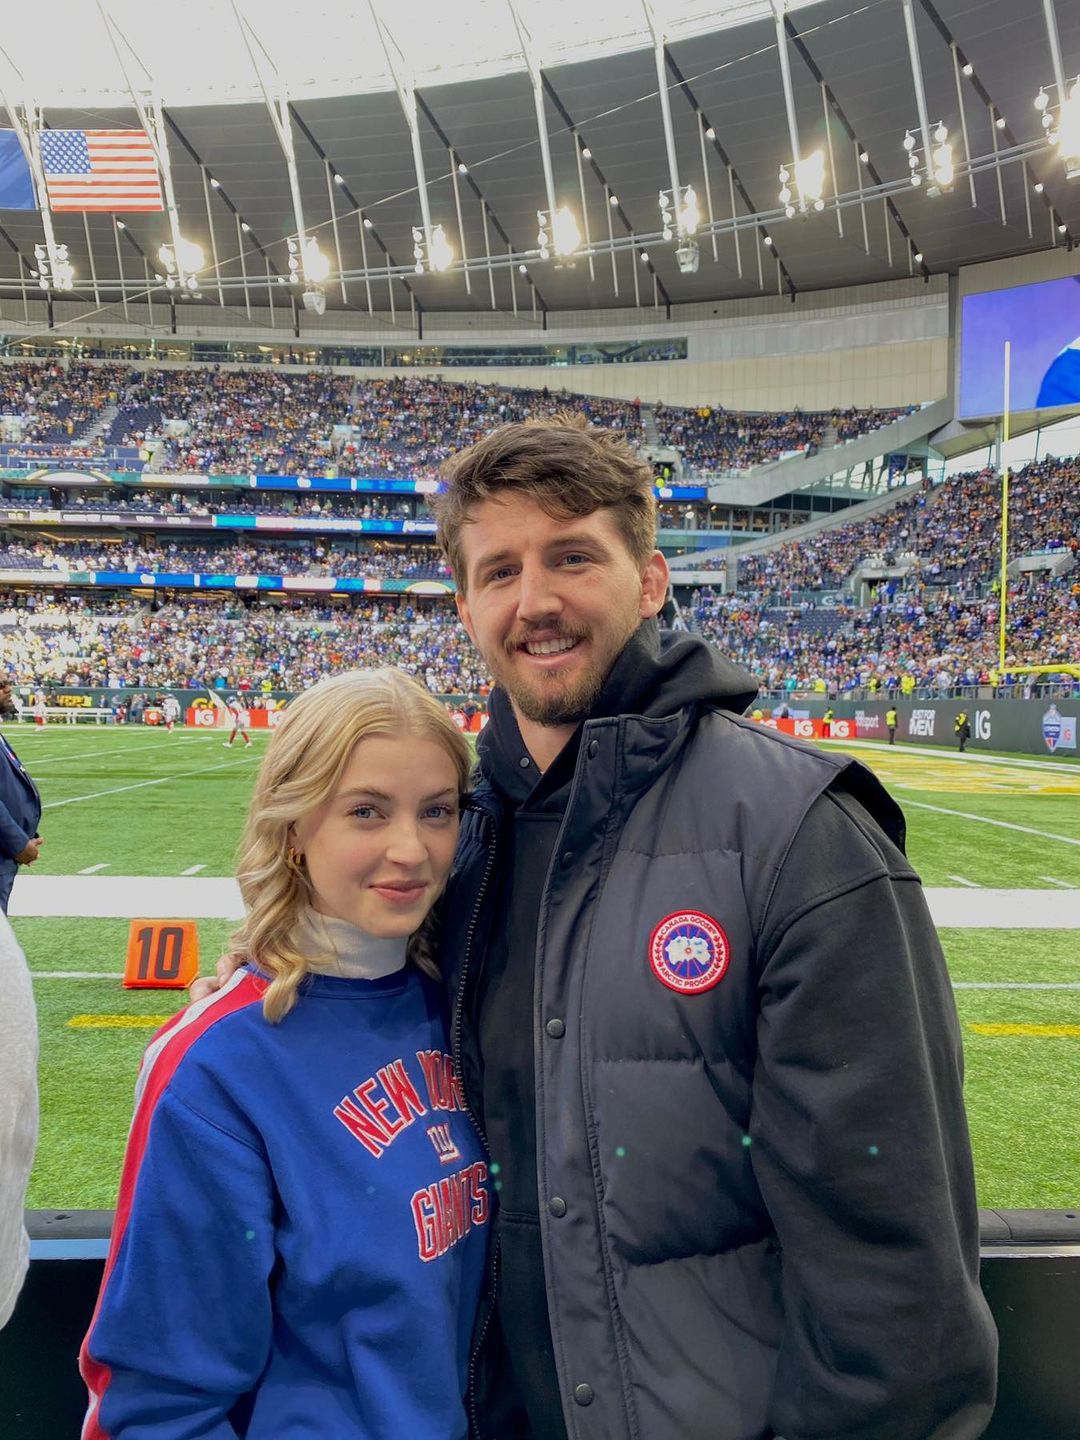 couple at NFL game 